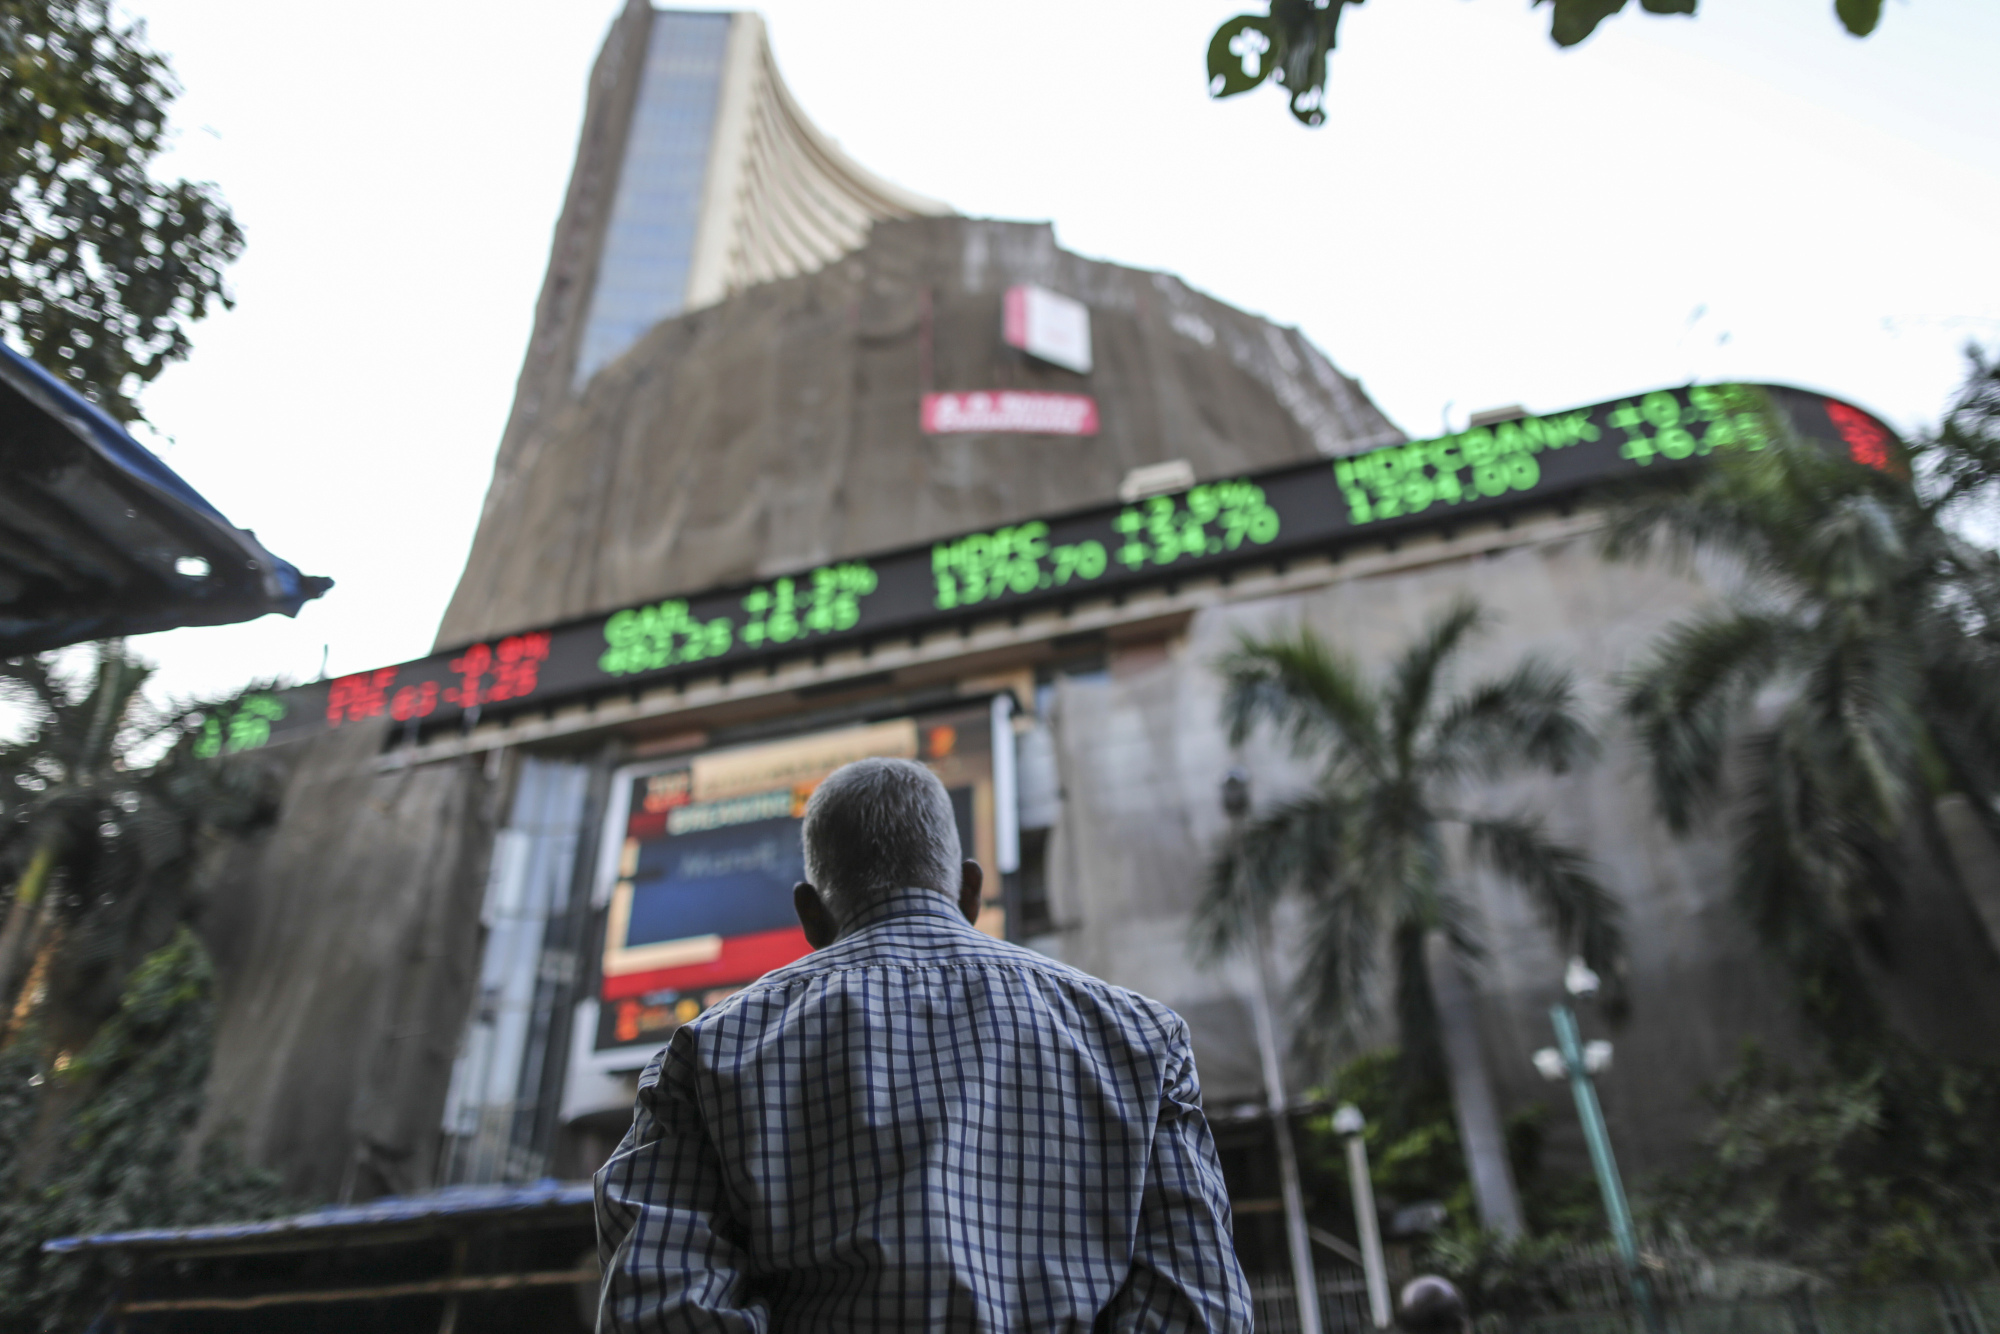 A man looks up at an electronic ticker board that indicates stock figures at the Bombay Stock Exchange in Mumbai, India.